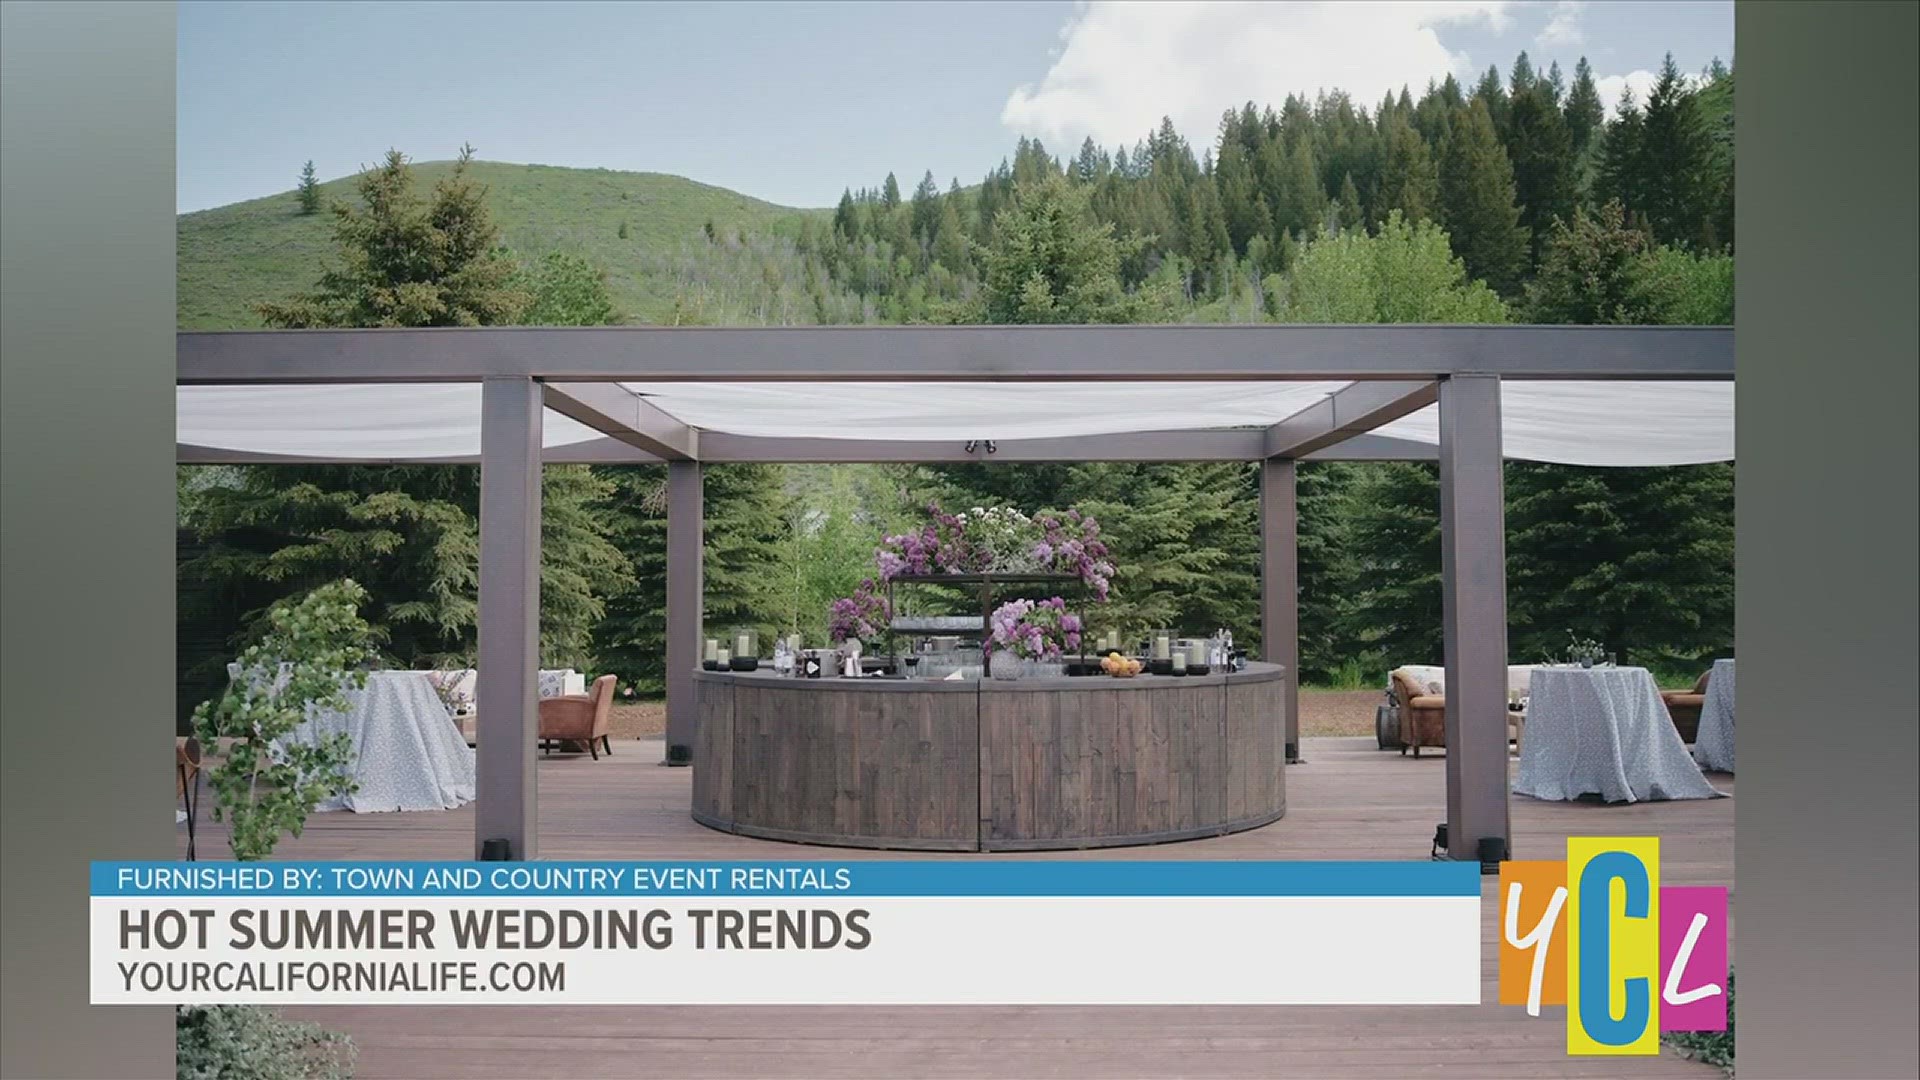 The number of people saying "I do" in the U.S. has increased within the last year. See which wedding trends are on the rise this season.